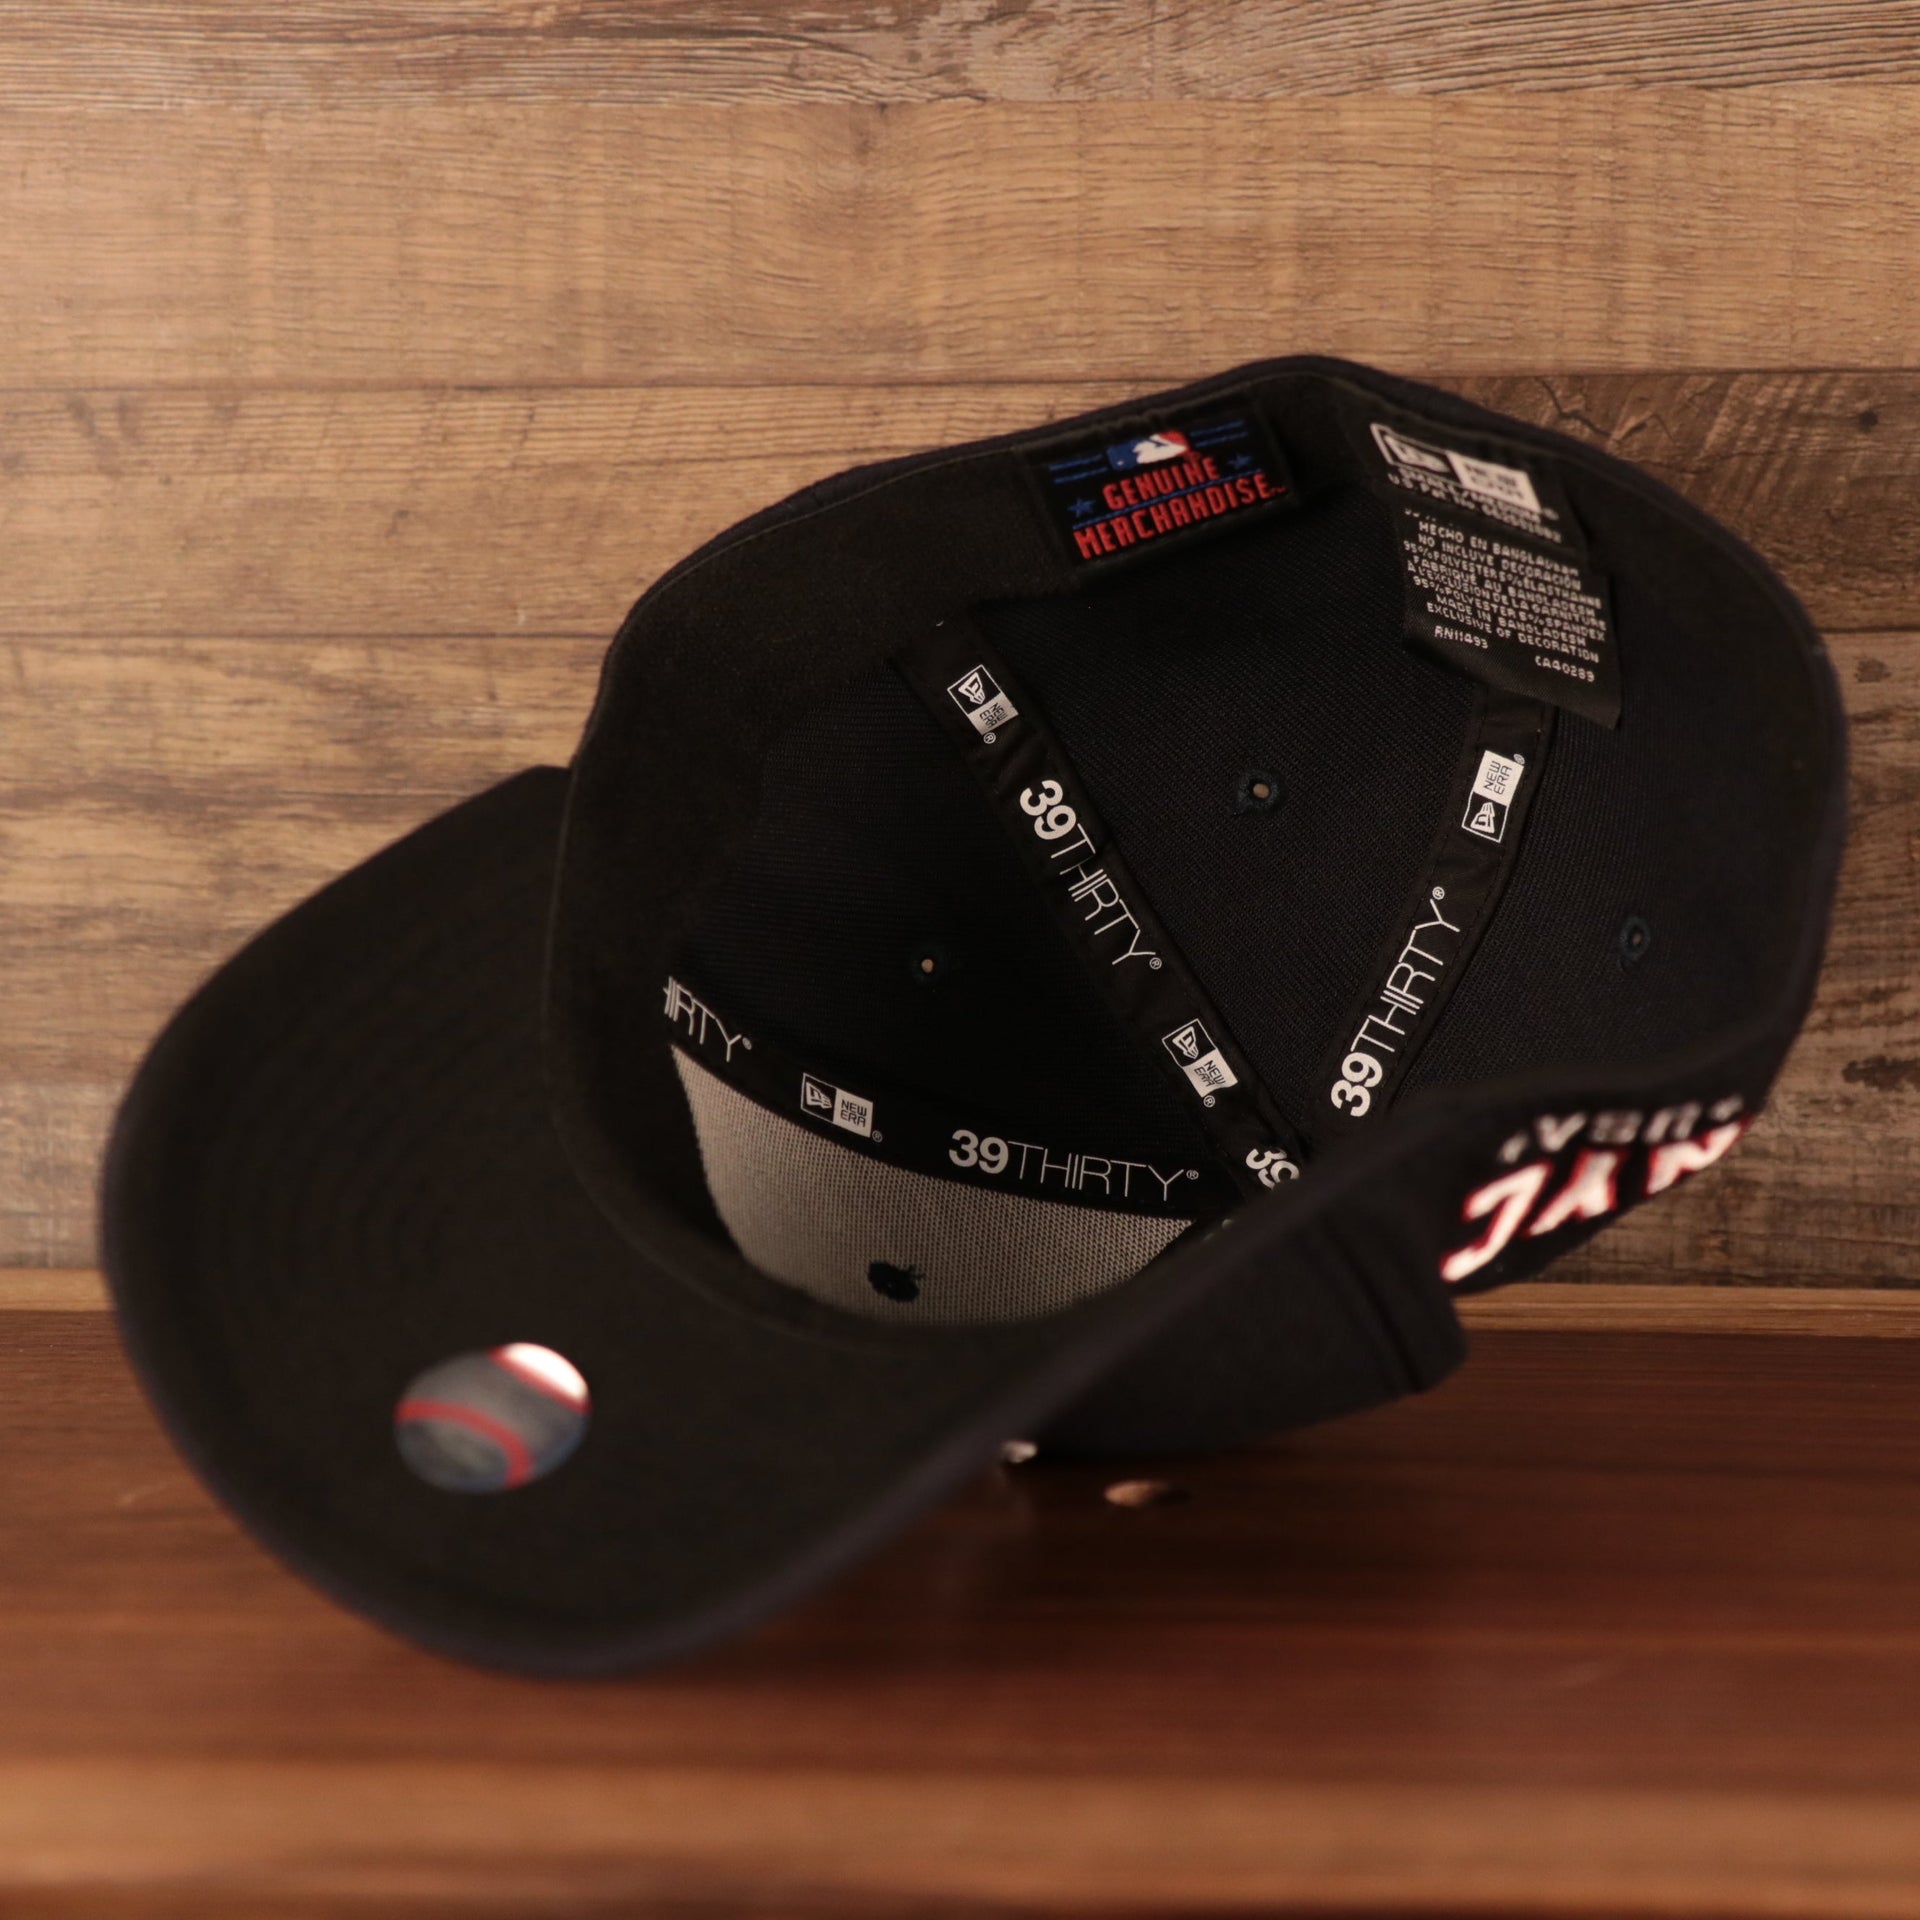 An inside view of the New York Yankees 2021 fourth of July navy 39thirty flexfit hat by New Era.